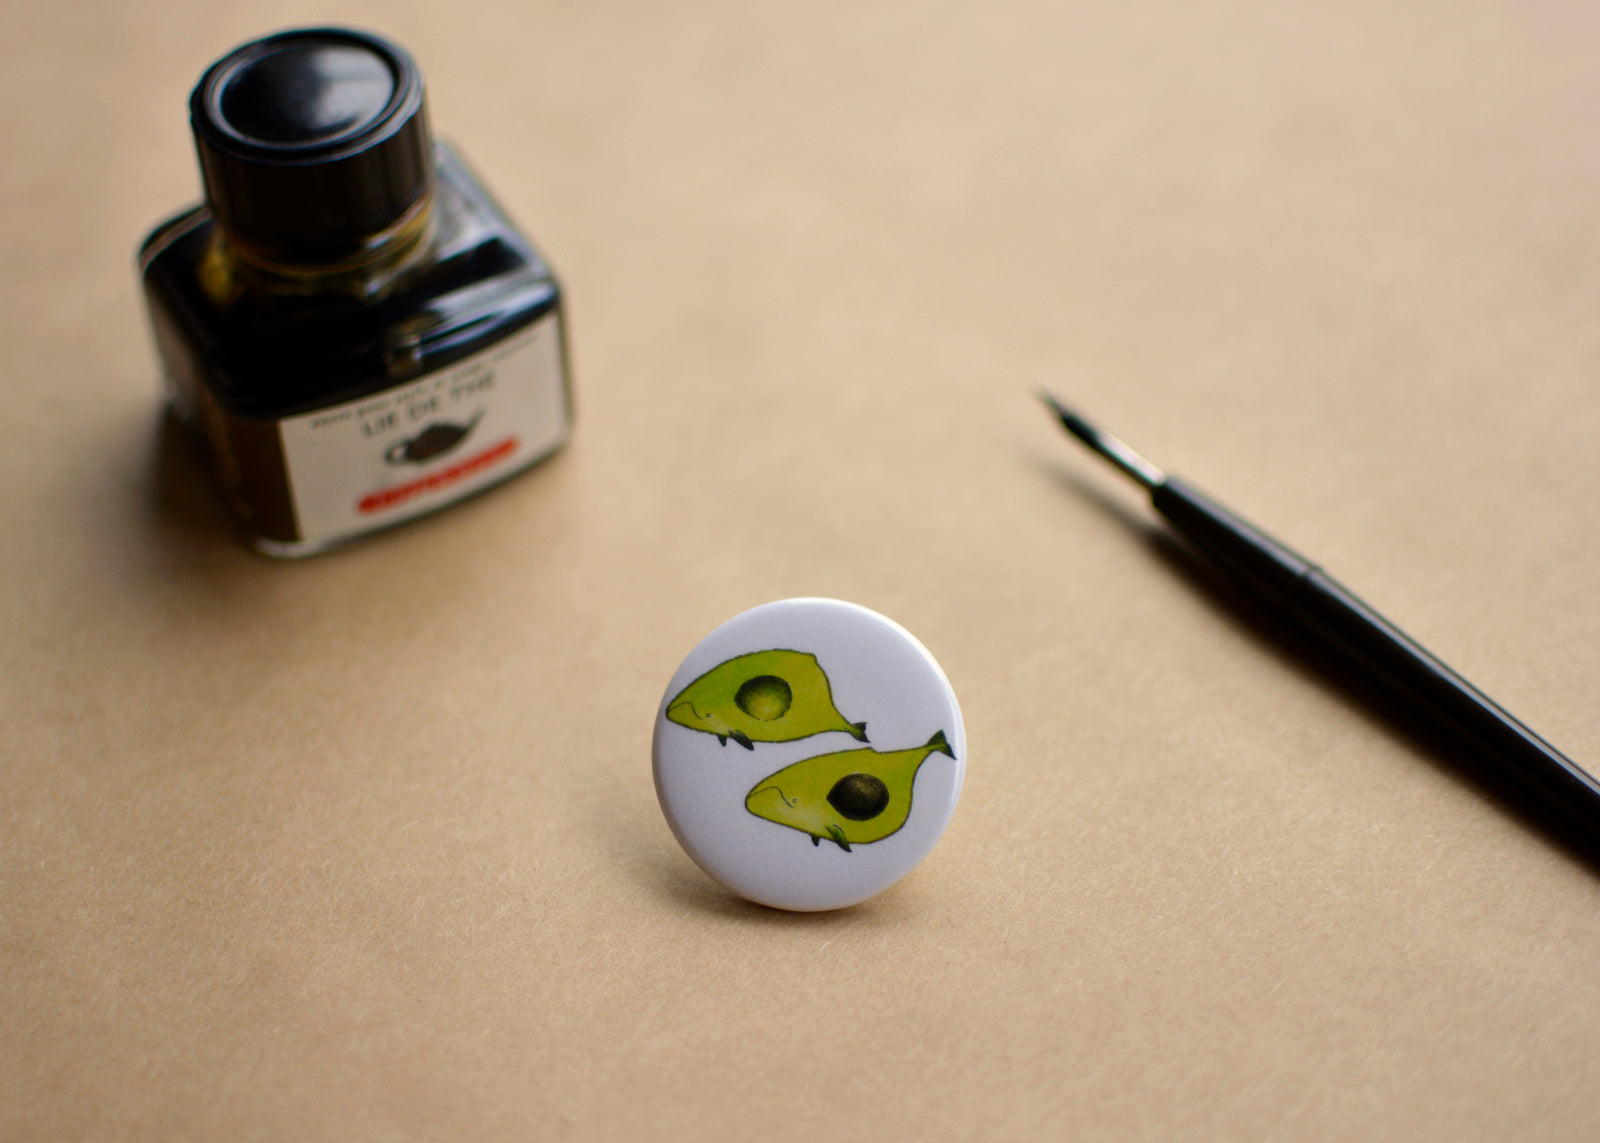 Pin back button with two imaginative "Avocado whales", next to ink bottle and dip pen.